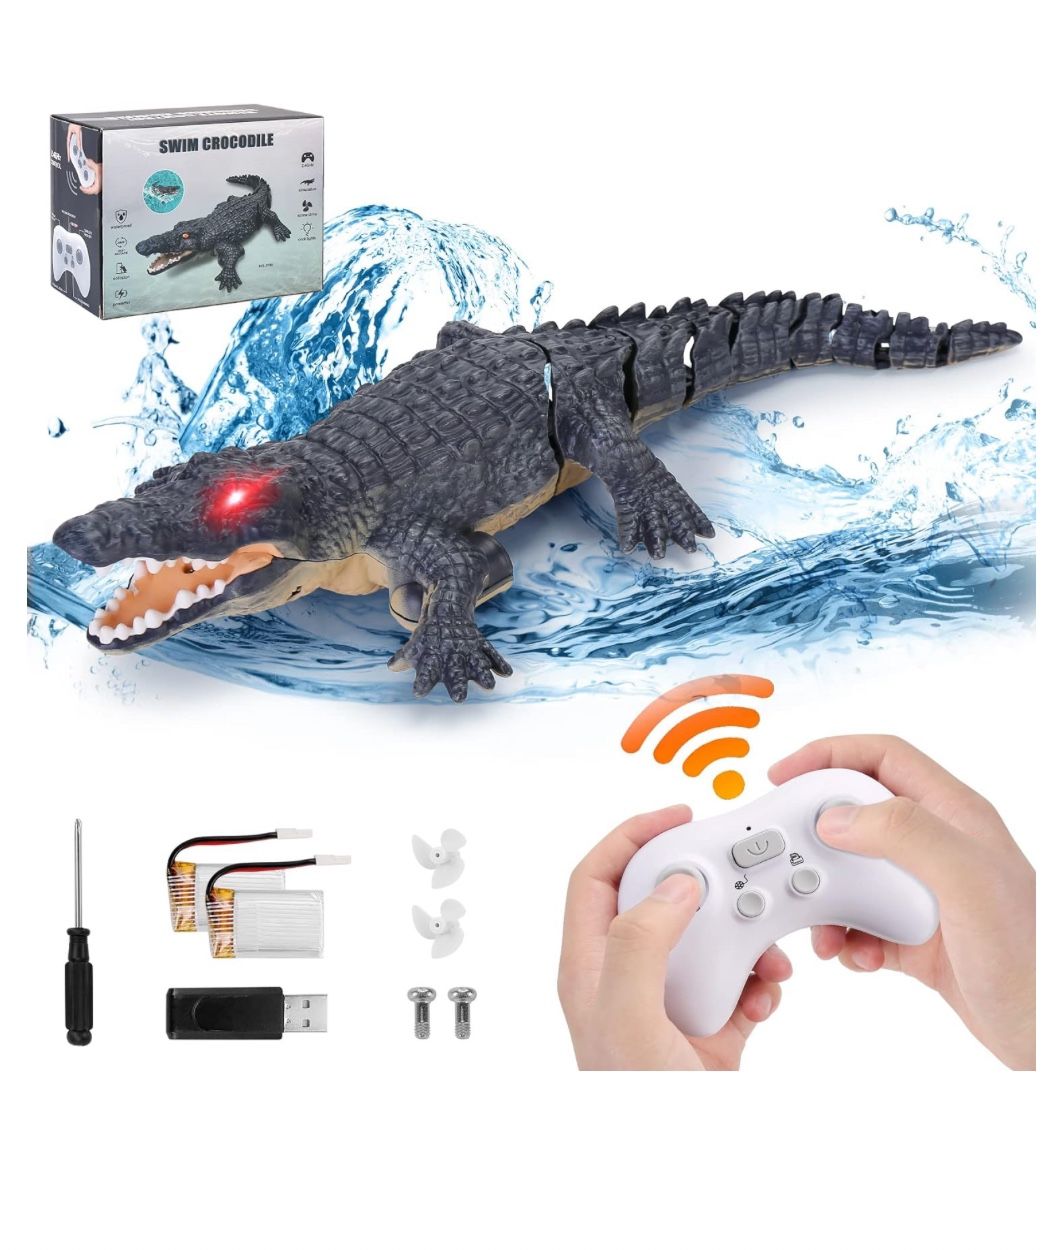 Remote Control Crocodile Boat Toy 1:18 Scale High Simulation RC Crocodile for Swimming Pool Bathroom Great Gift RC Boat Alligator Toys for 6+ Year Old